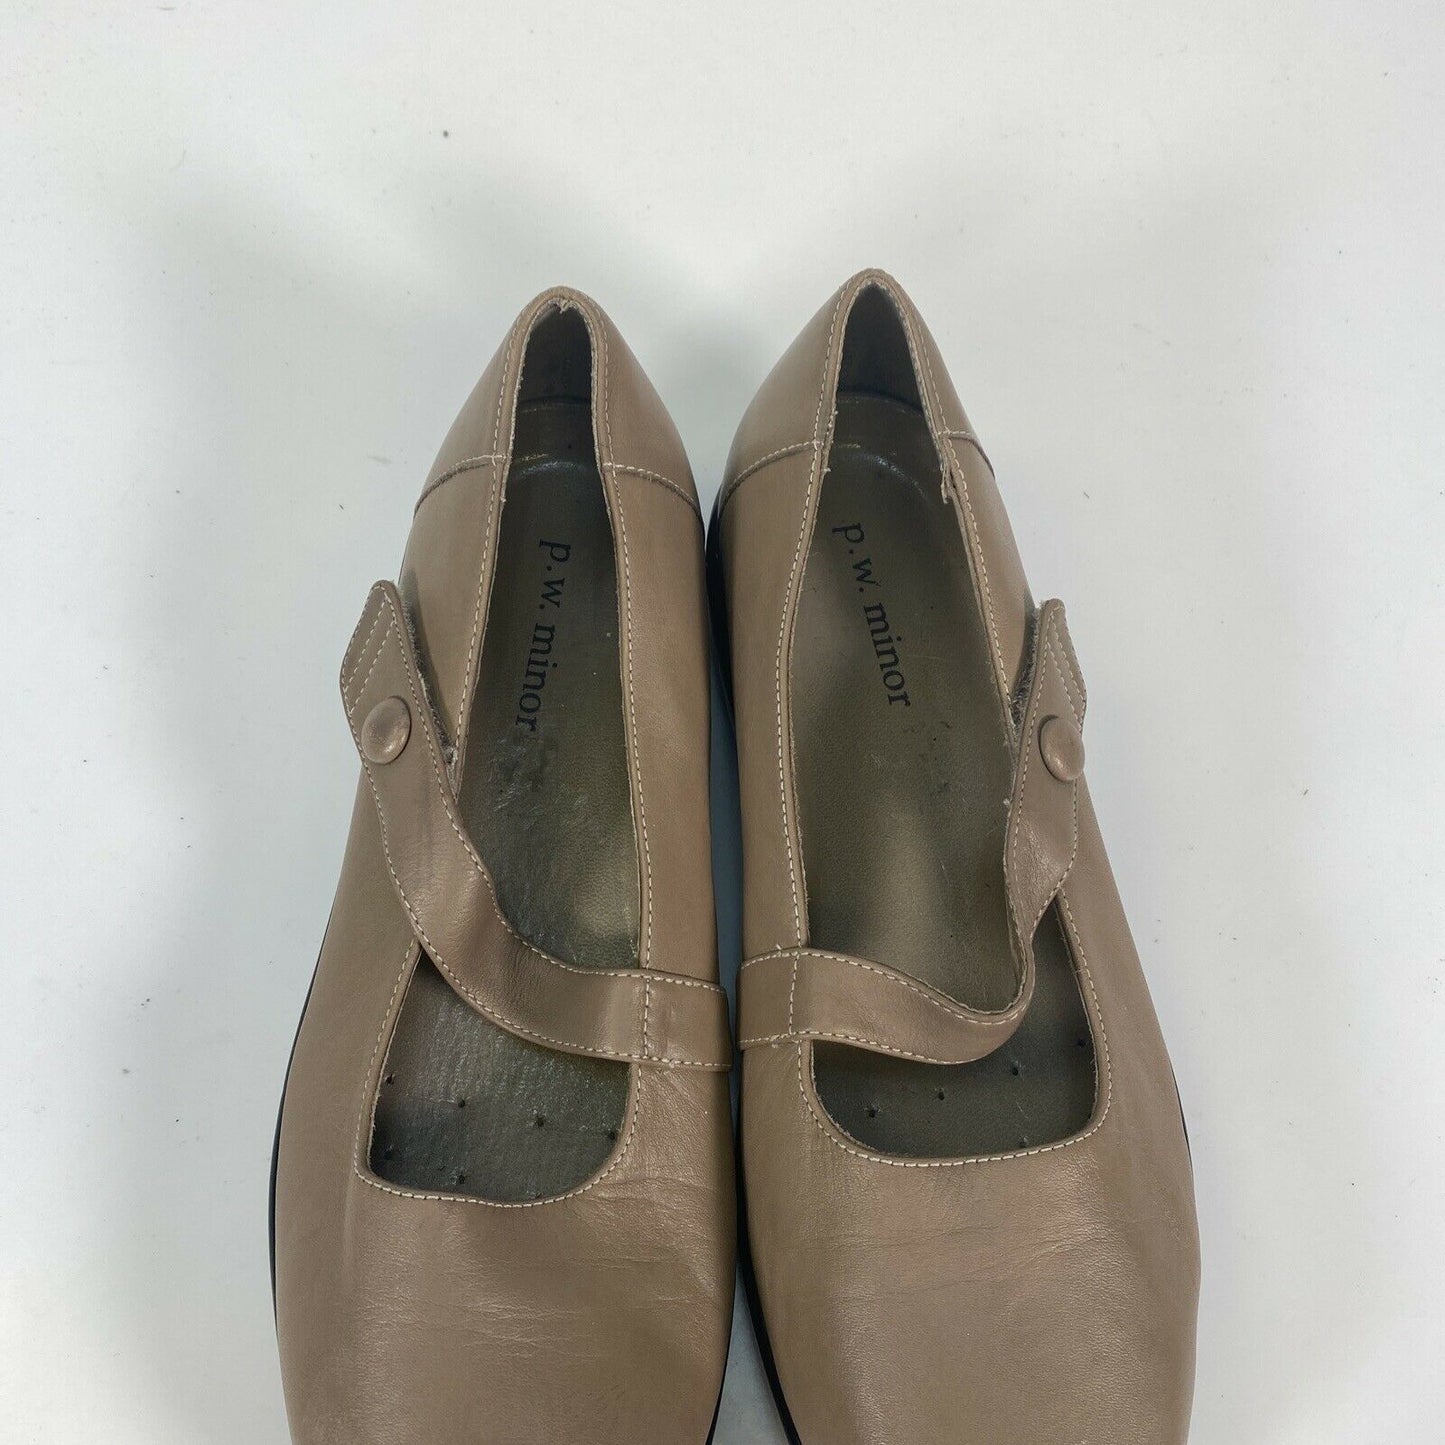 P.W. Minor Women's Taupe Leather Classic Marry Jane Walking Shoes Sz 5.5